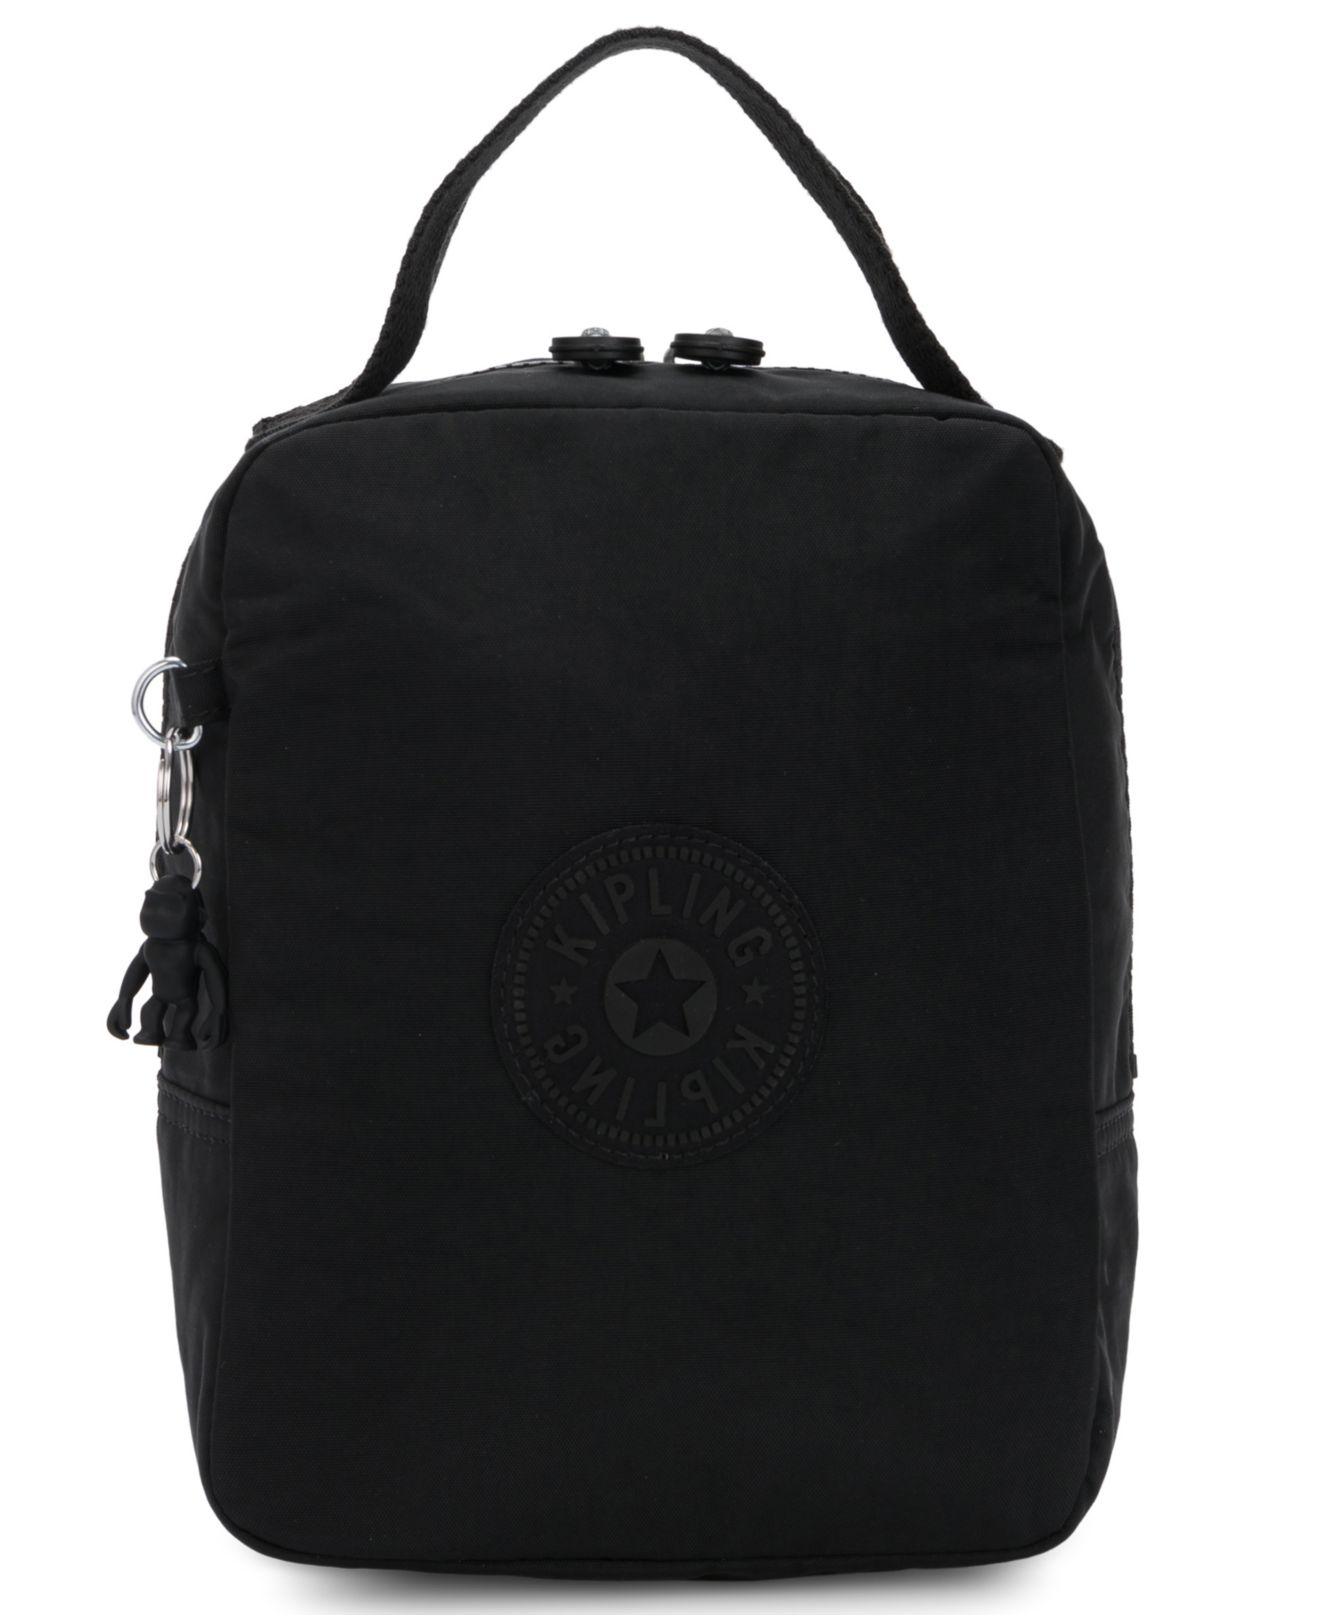 Kipling Synthetic Lyla Insulated Lunch Bag Top Handle in Black | Lyst